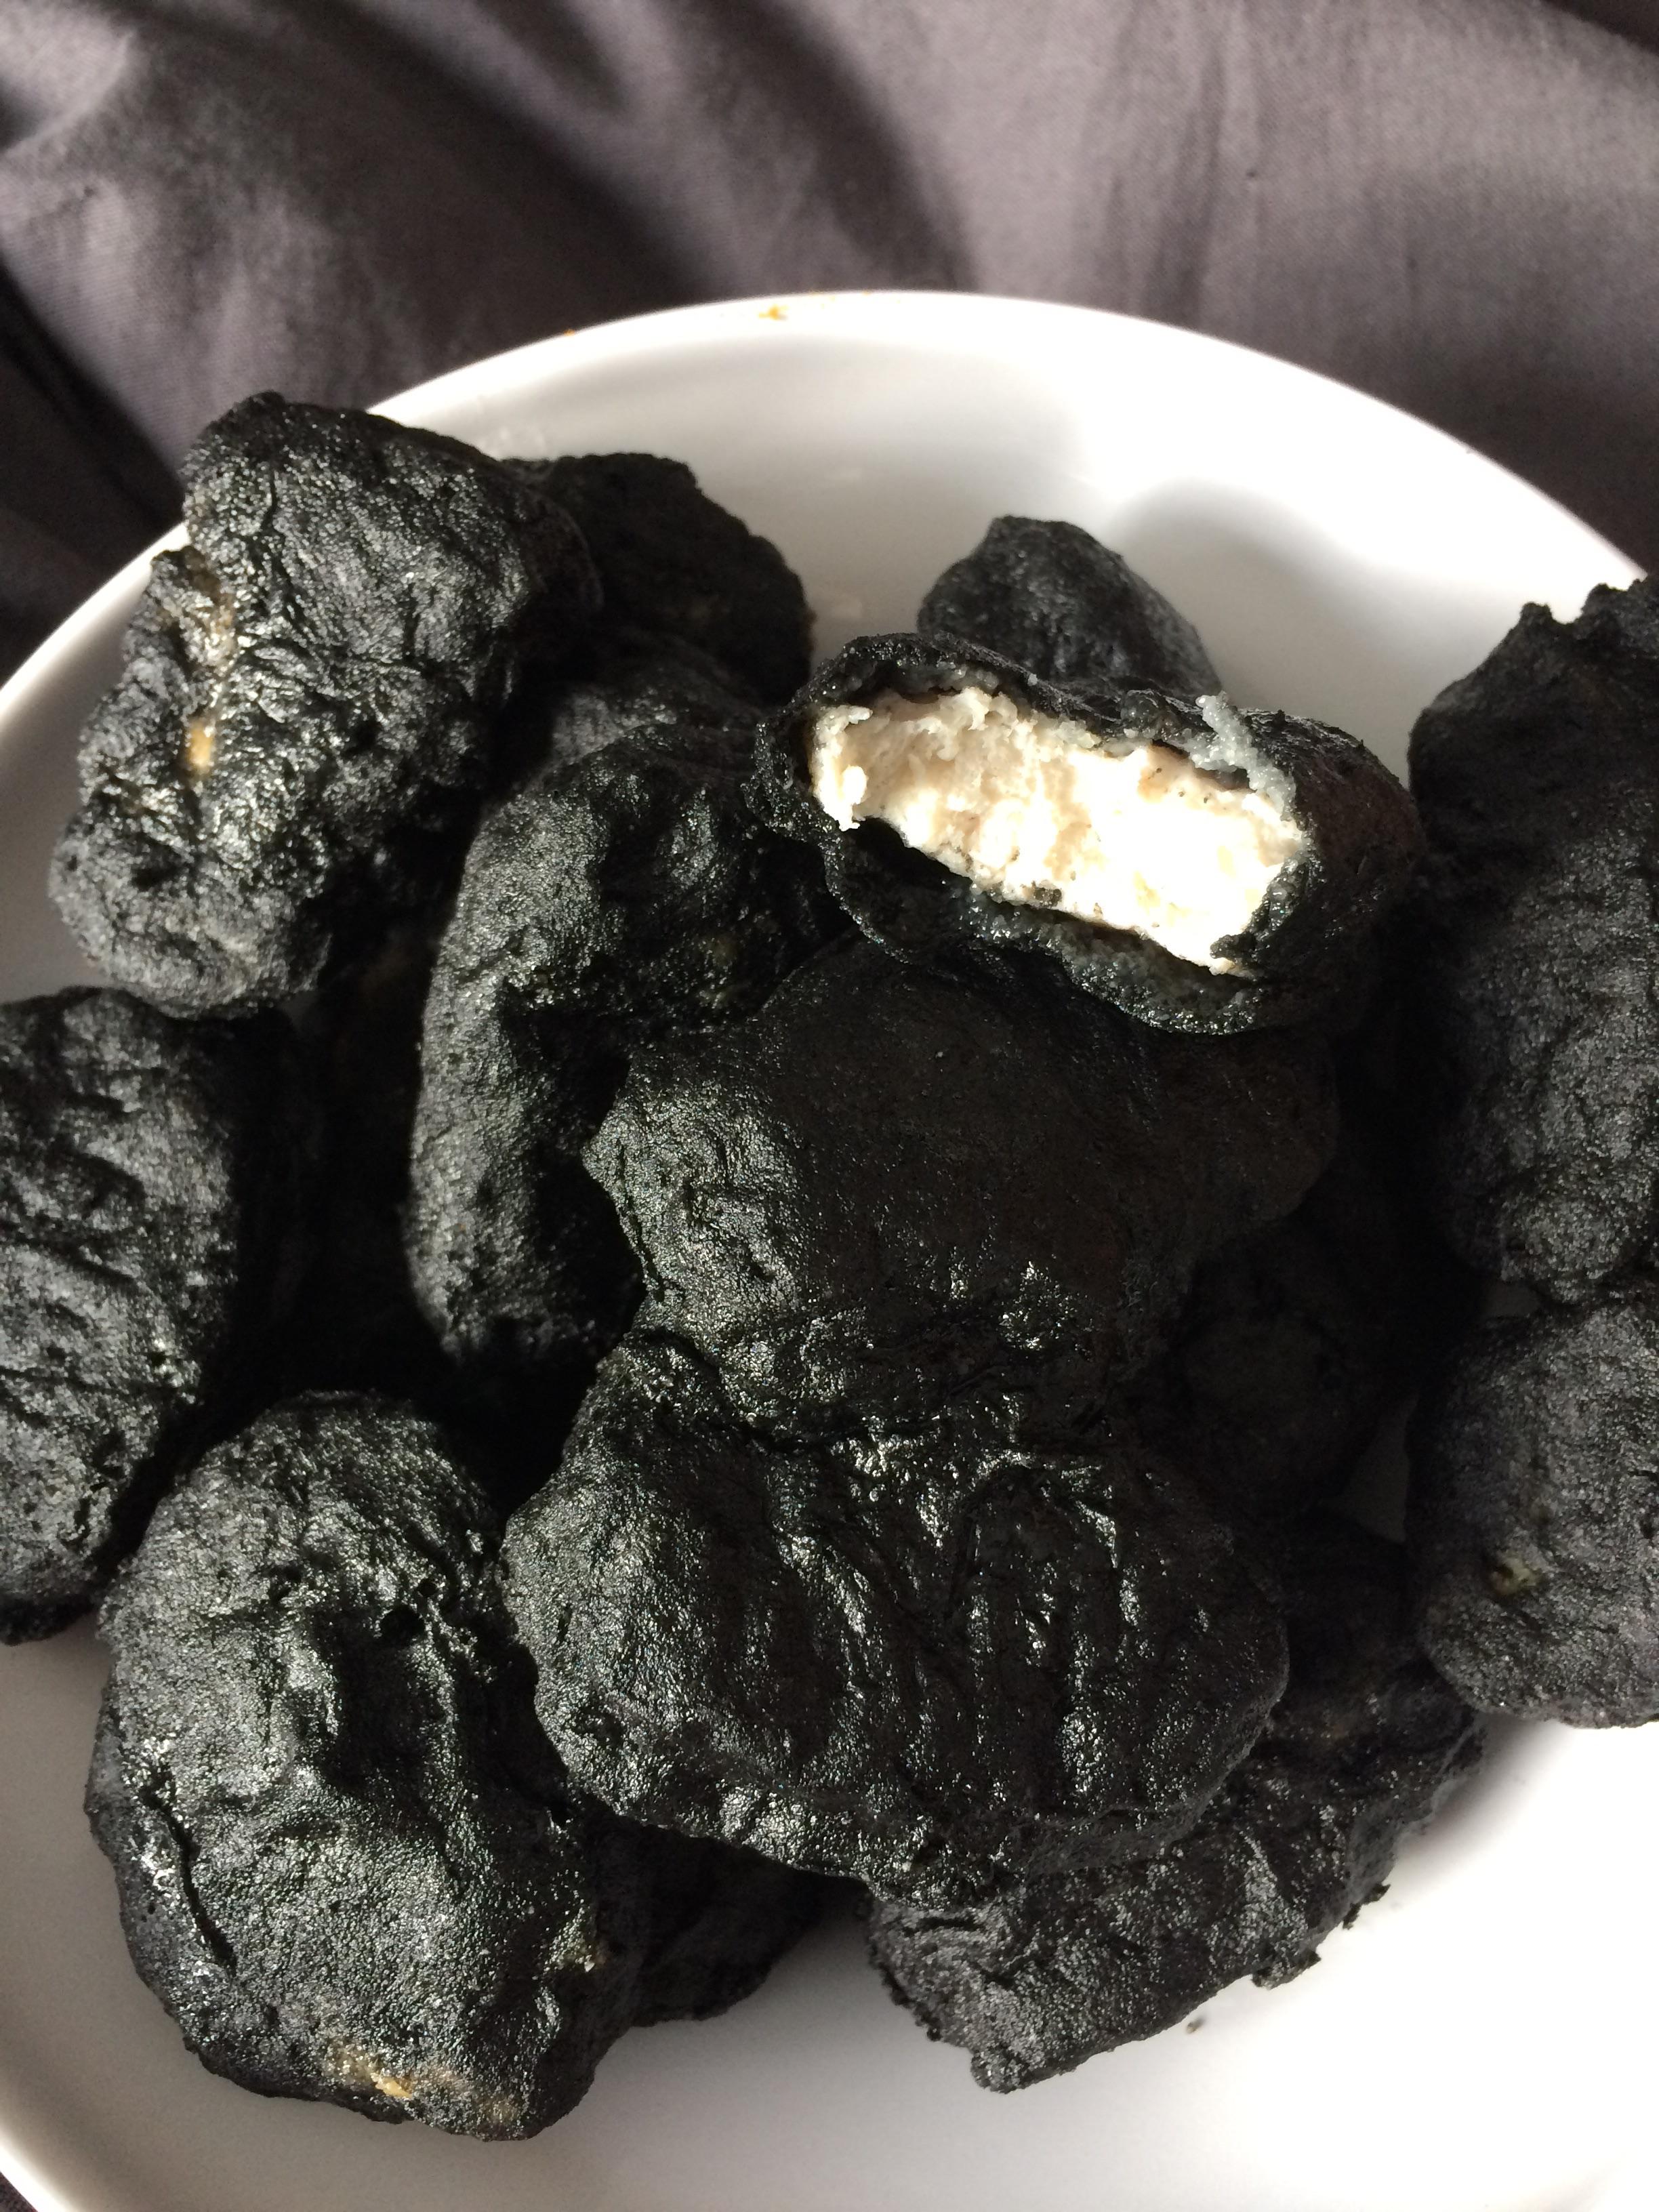 These nuggets were dyed black for Halloween, and frankly, we're terrified.